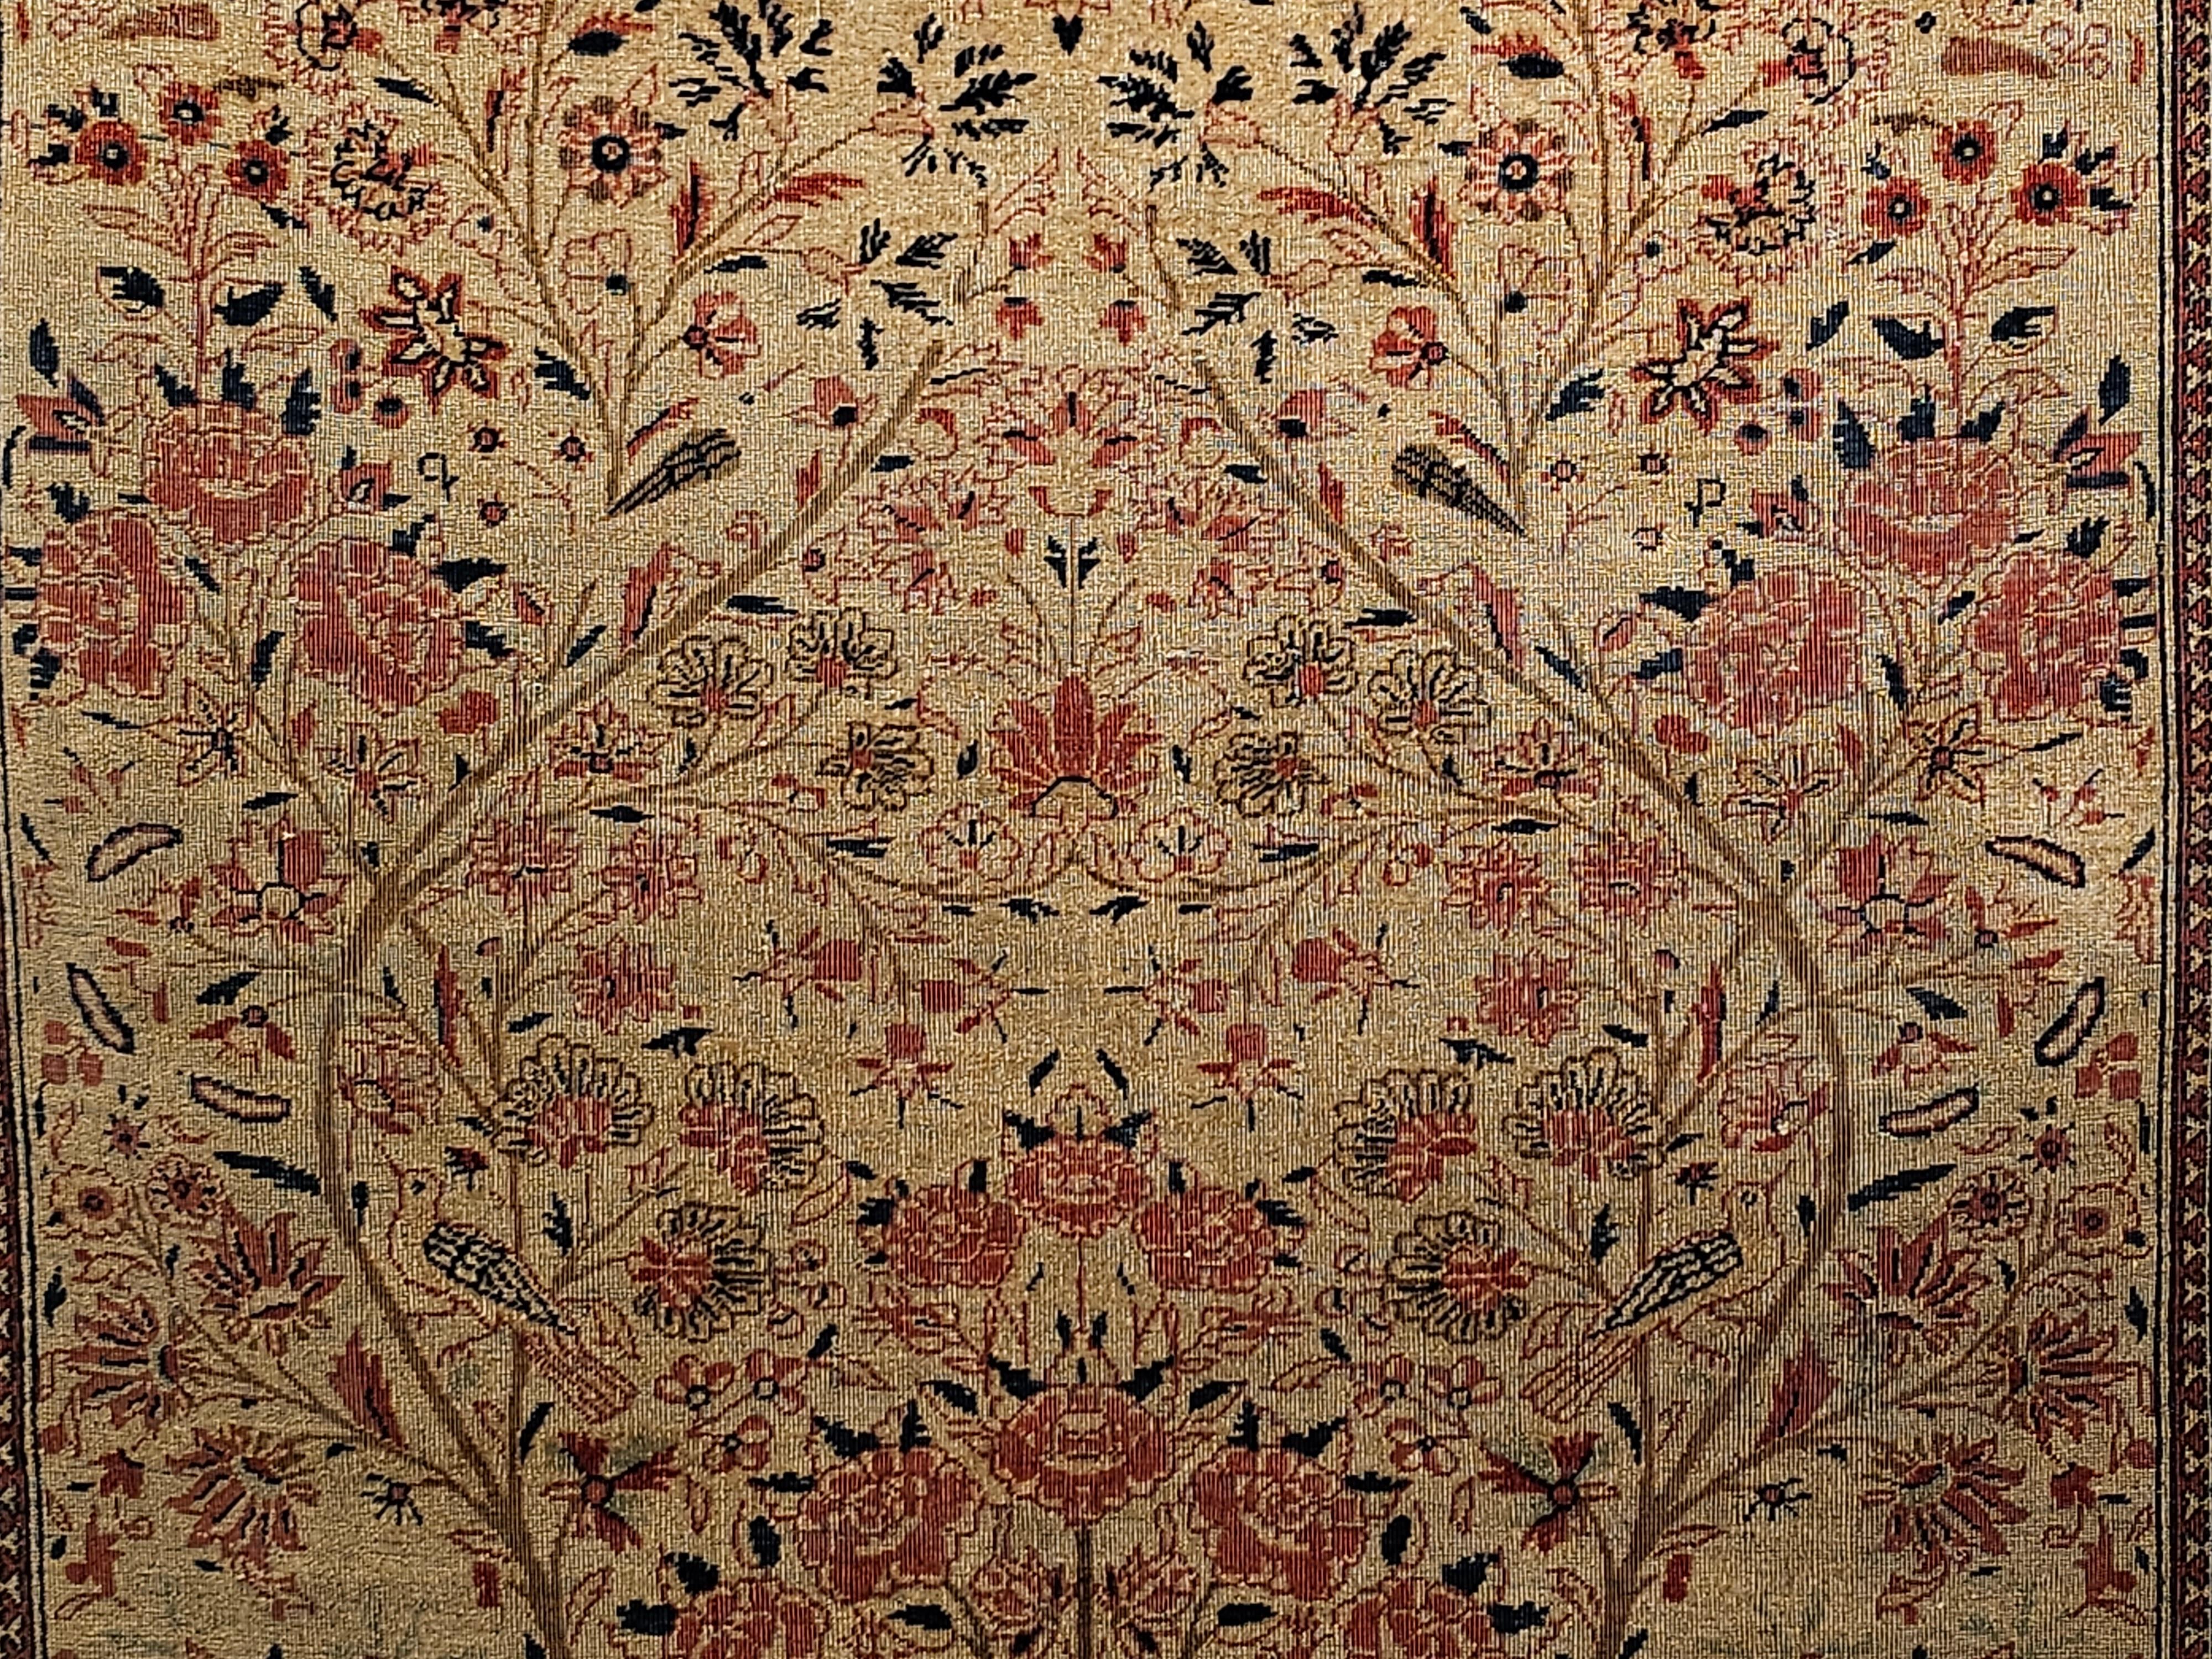 19th Century Persian Kashan “Tree of Life” Vase Rug in Ivory, Brick Red, Navy For Sale 1